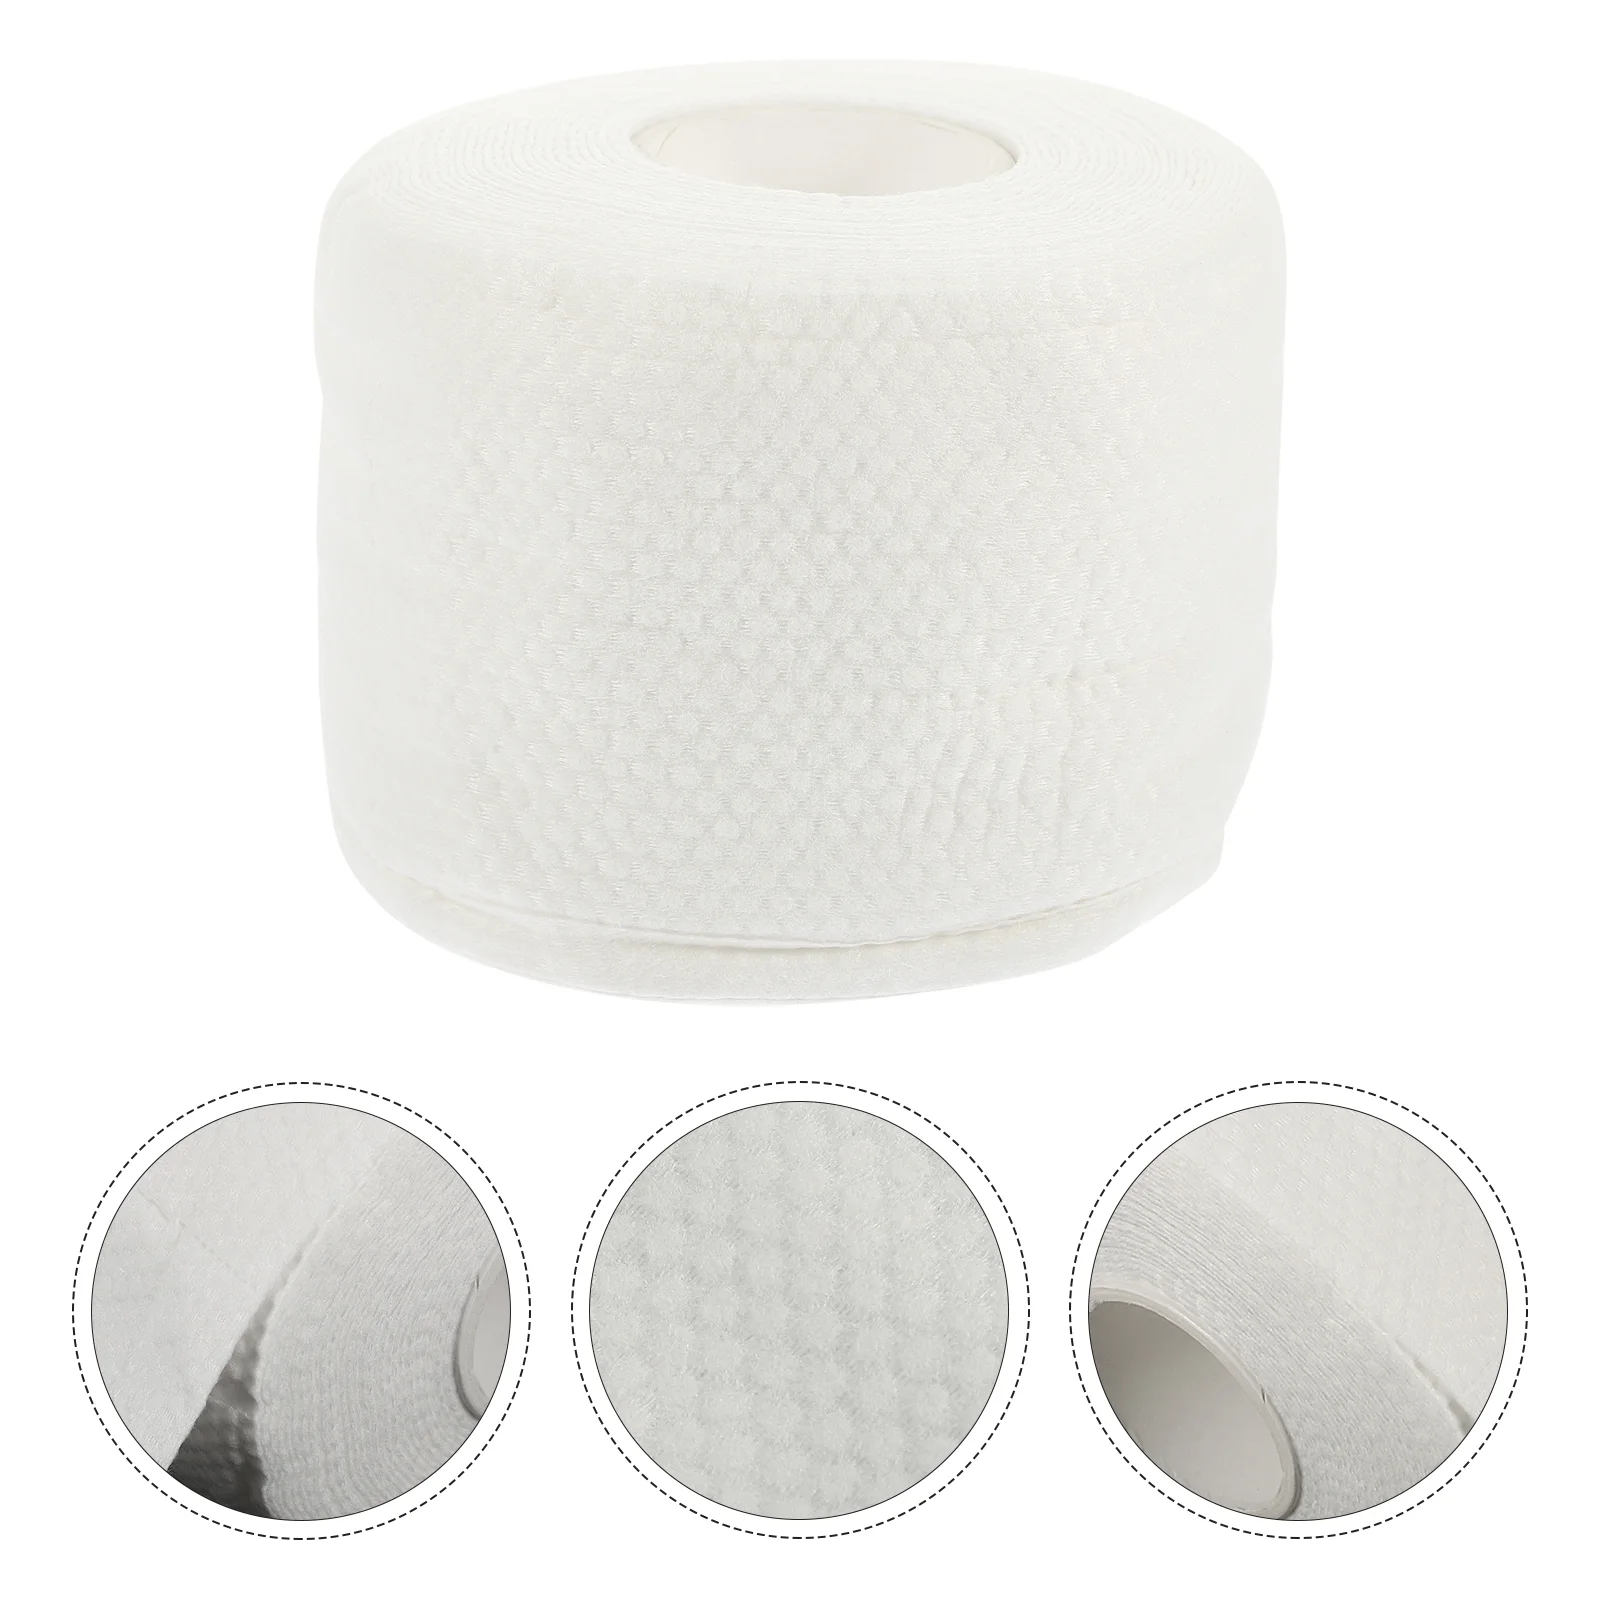 

1 Roll Baby Disposable Shop Towelss Makeup Remover Cleansing Facial Towel Skincare Washcloth